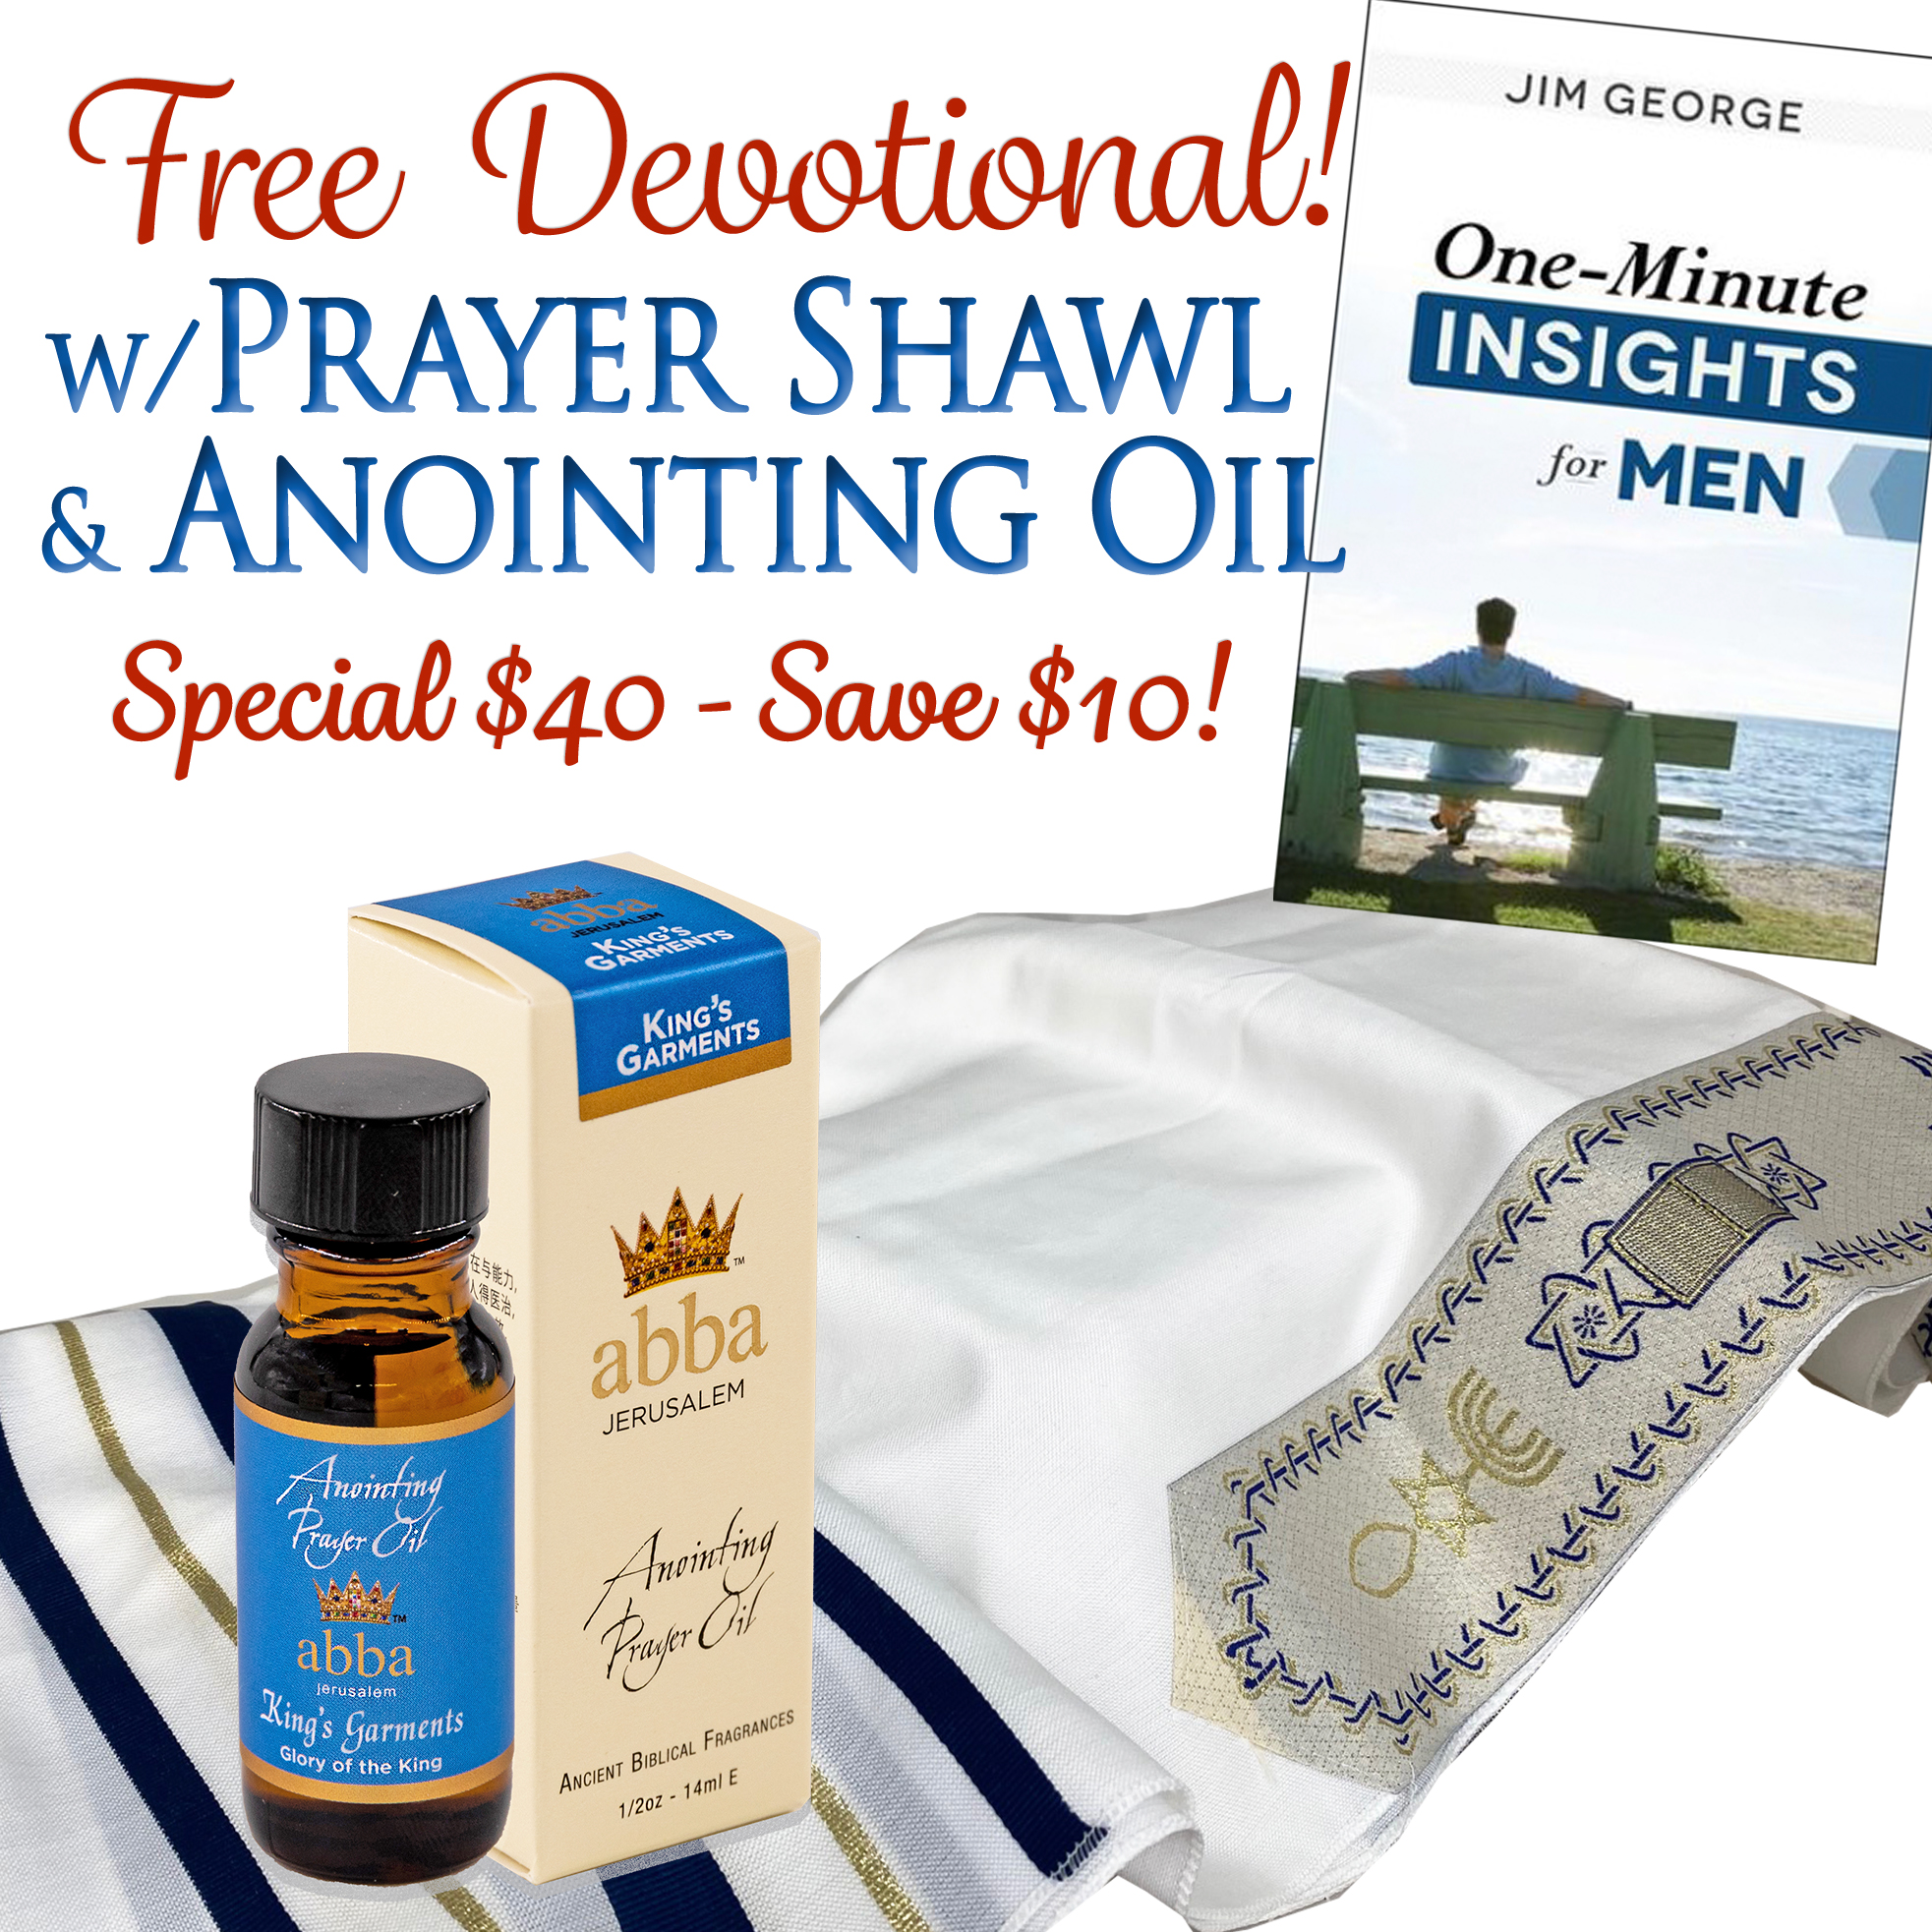 FREE DEVOTIONAL WITH ACRYLIC HEALING SCRIPTURES TALIT & OIL